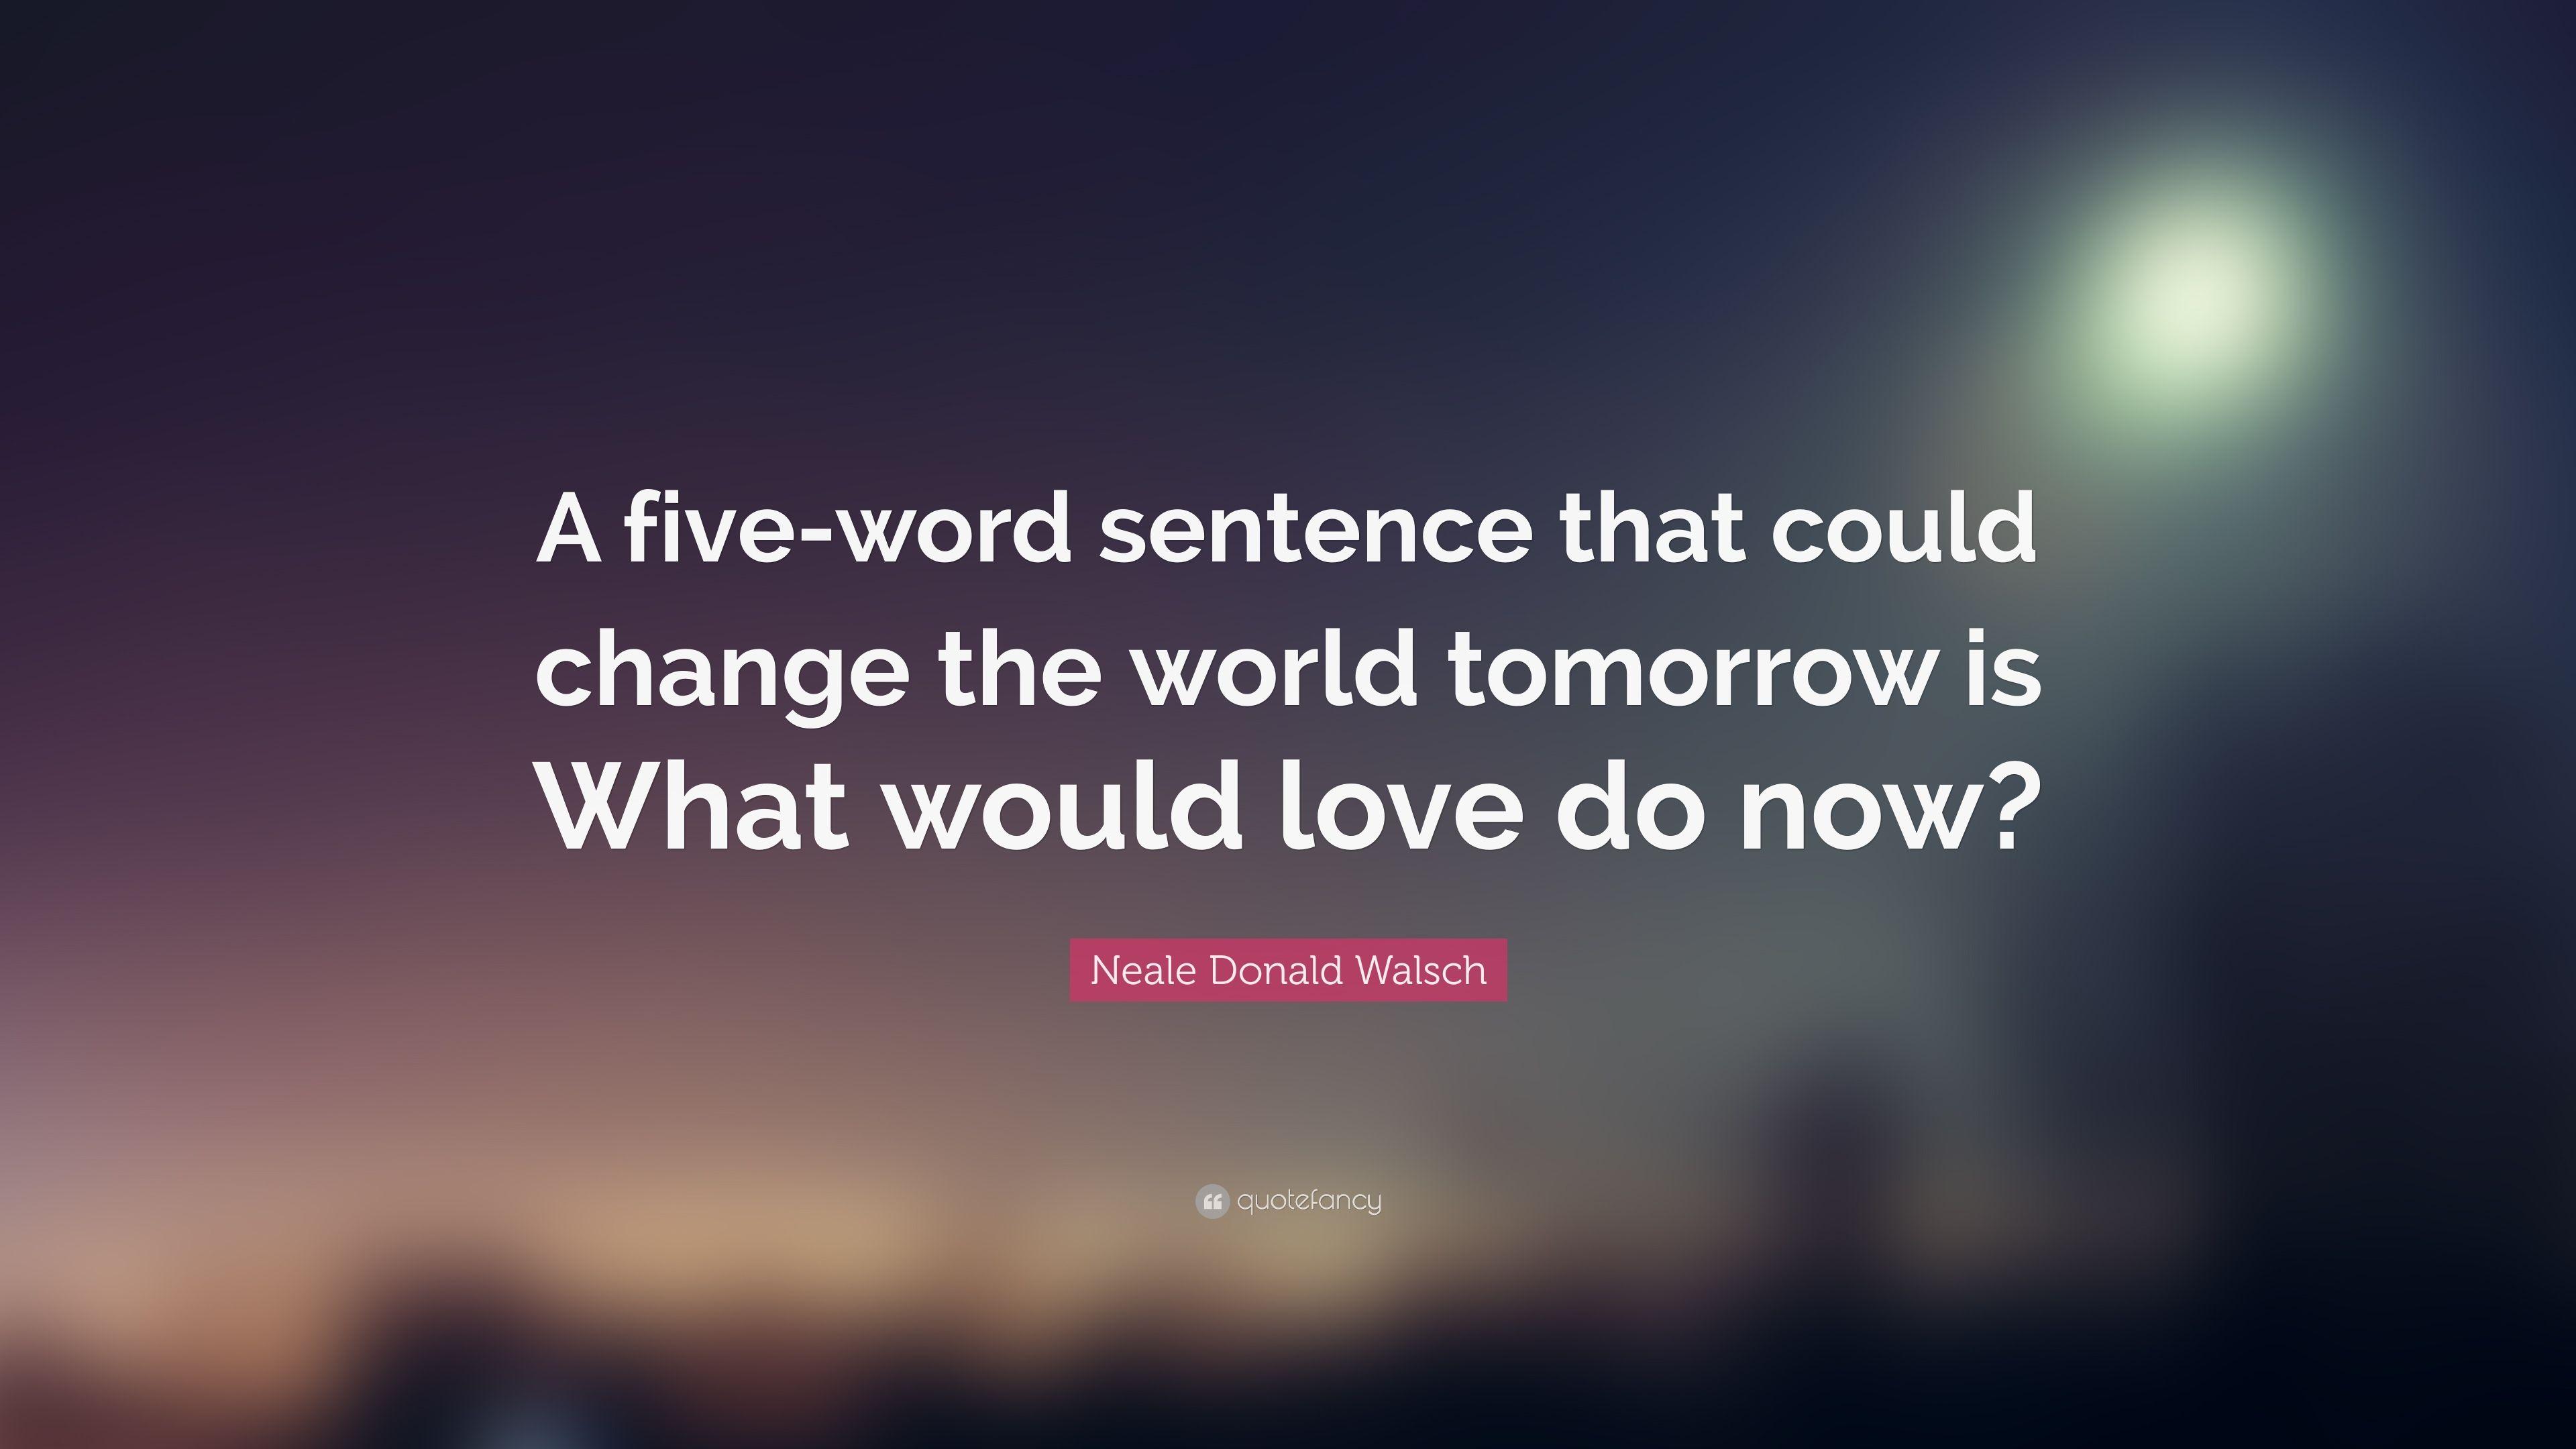 Neale Donald Walsch Quote: “A Five Word Sentence That Could Change